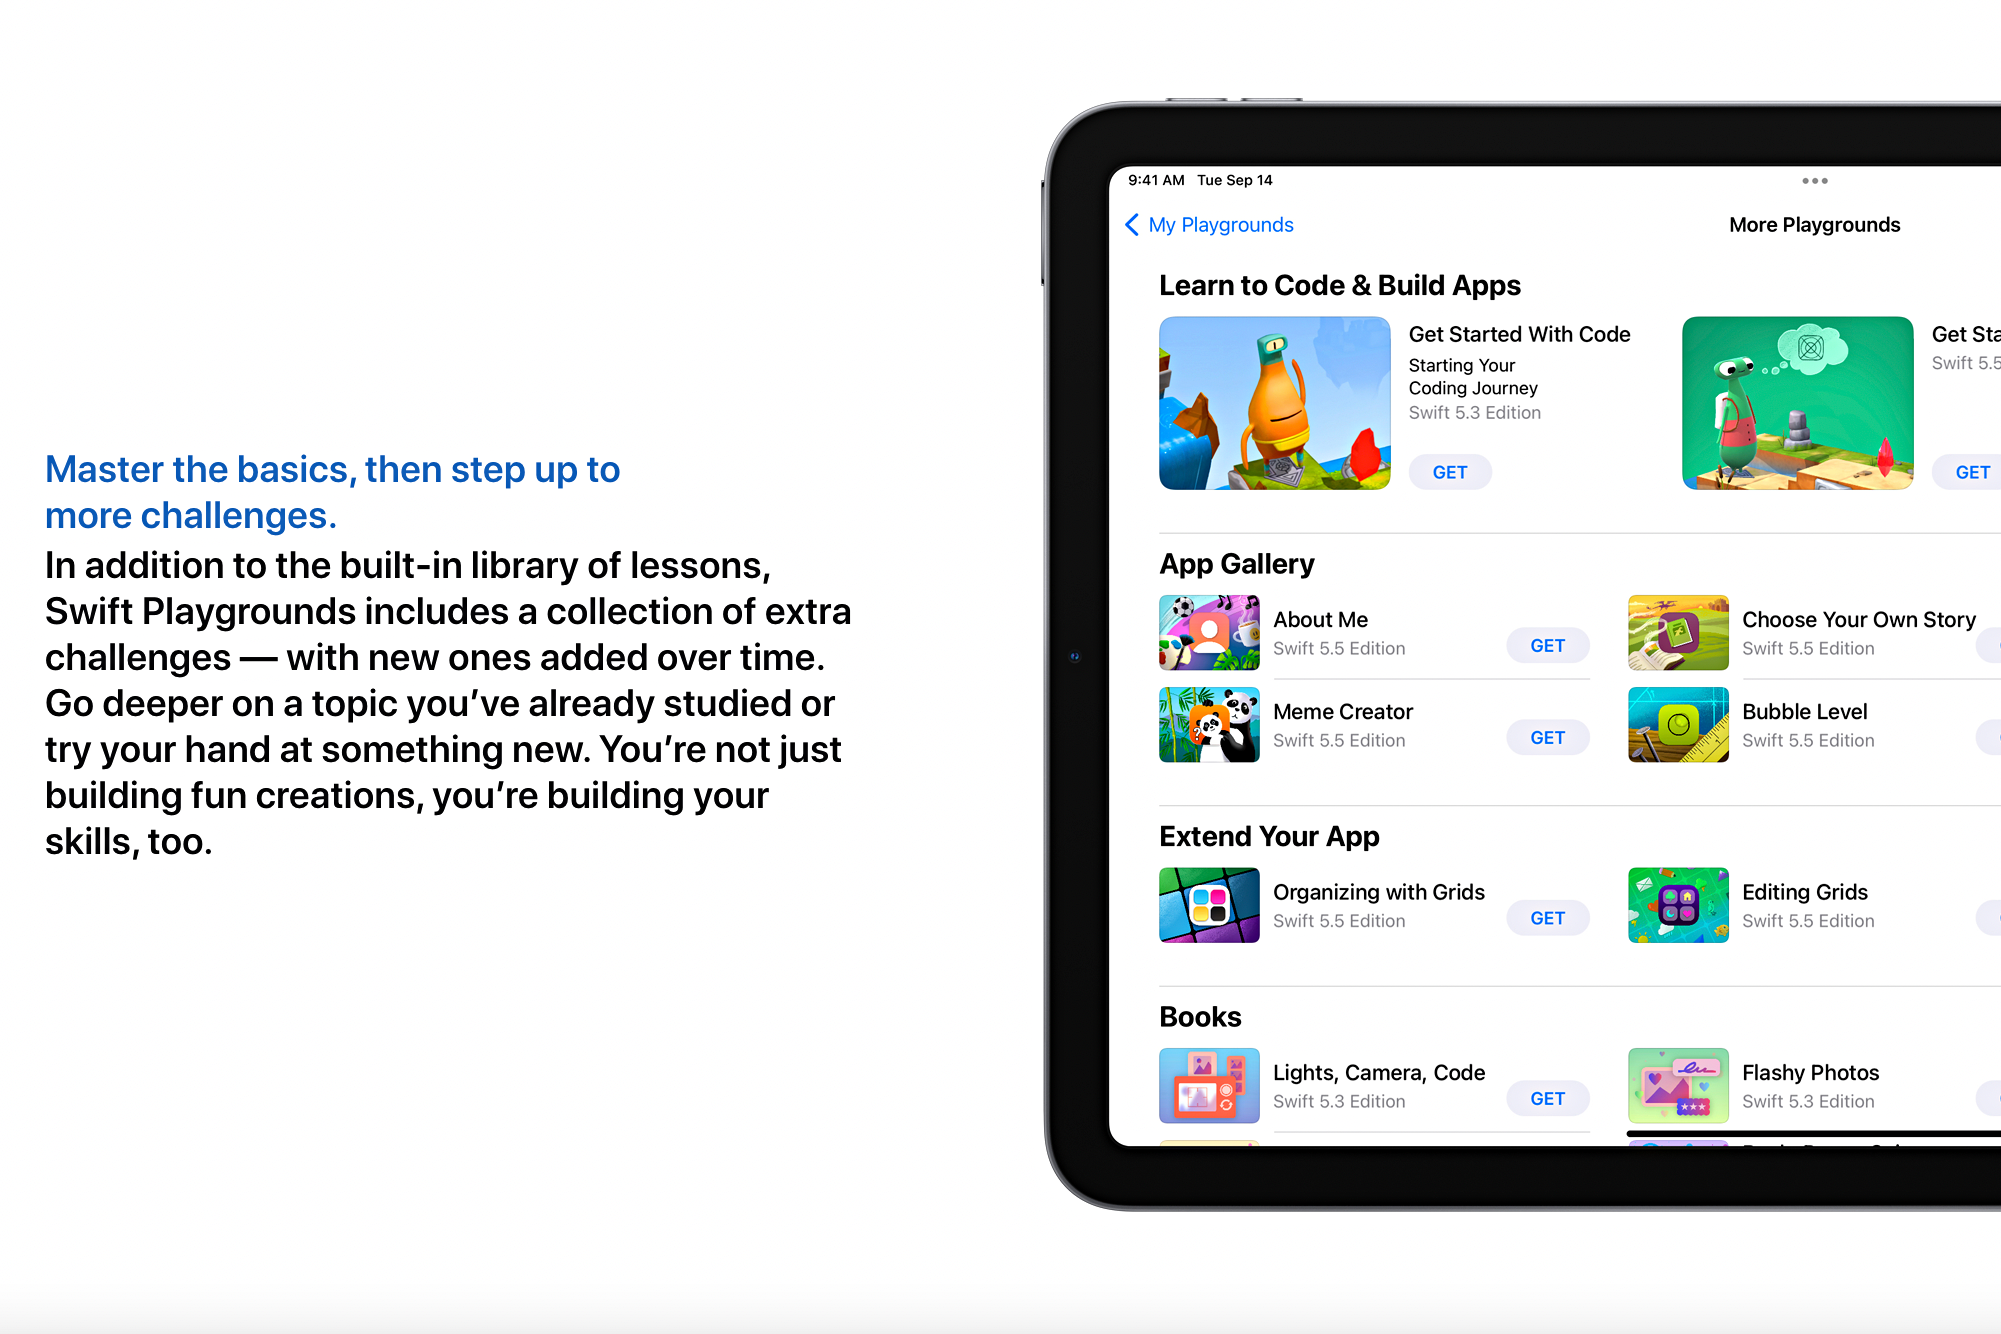 The Apple Swift Playgrounds app can turn anyone into a developer - Swift Playgrounds 4 lets iPads submit apps to the App Store without a Mac